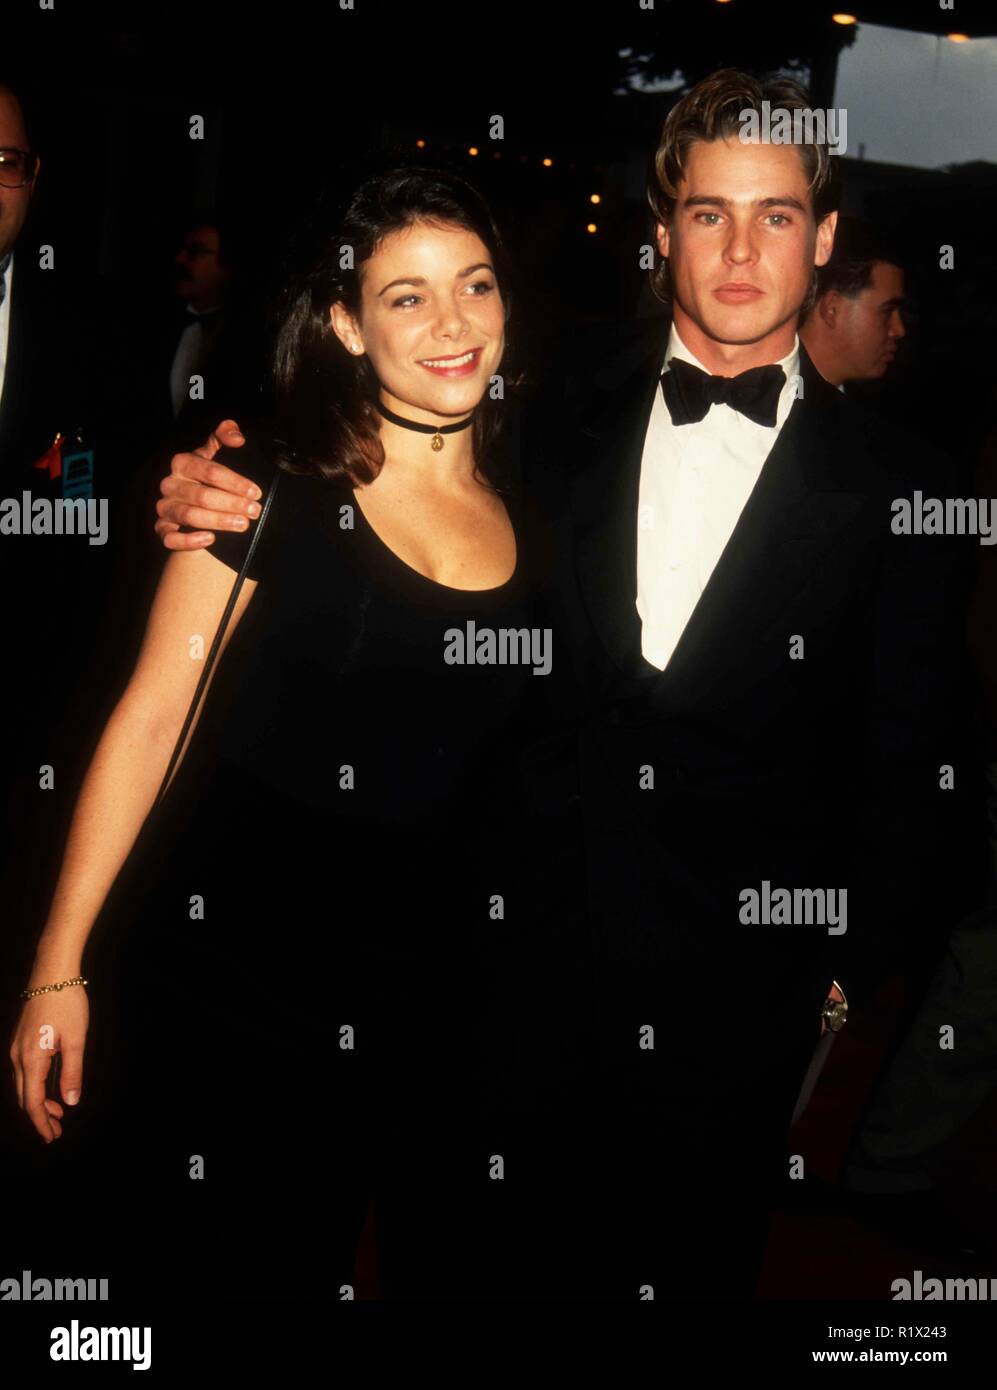 HOLLYWOOD, CA - JANUARY 17: Actress Meredith Salenger and actor William McNamara and actress Patricia Arquette attend the 14th Annual National CableACE Awards on January 17, 1993 at the Pantages Theatre in Hollywood, California. Photo by Barry King/Alamy Stock Photo Stock Photo